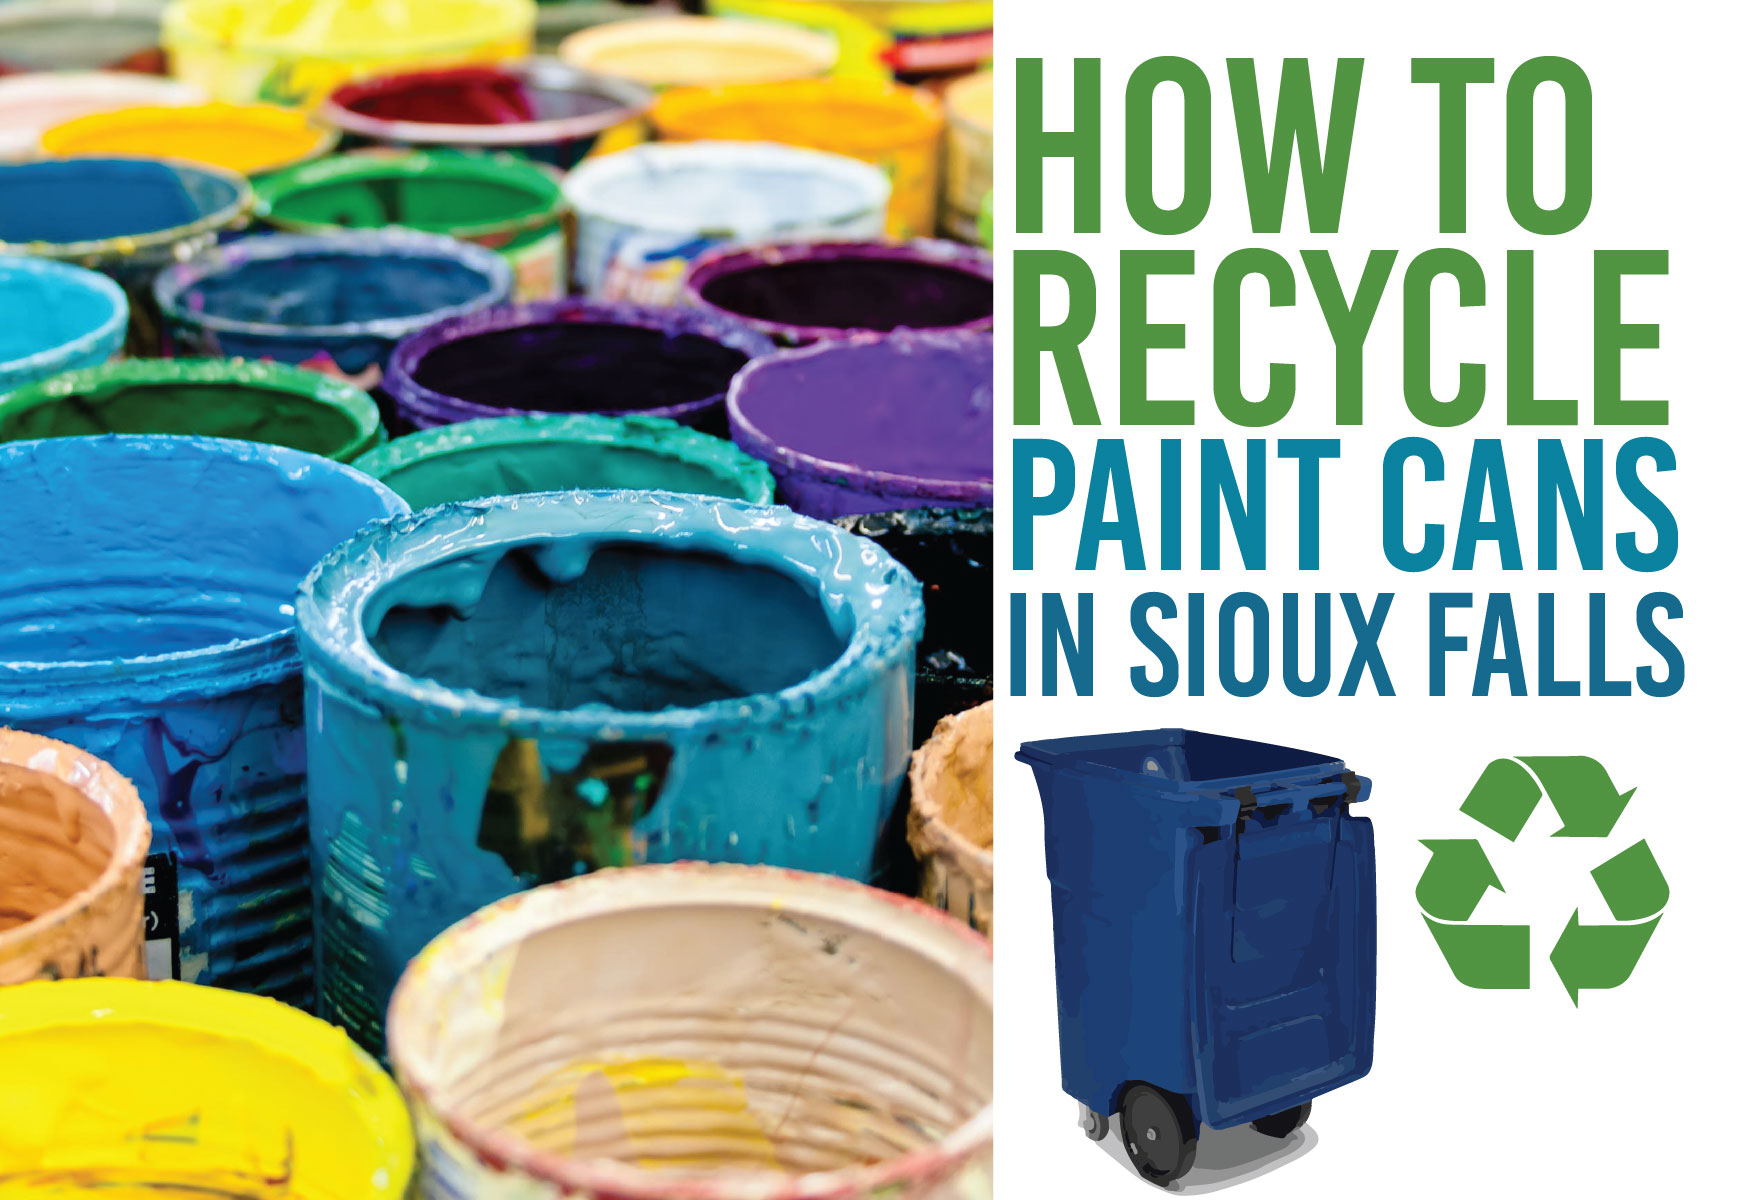 How to Recycle Paint Cans in Sioux Falls